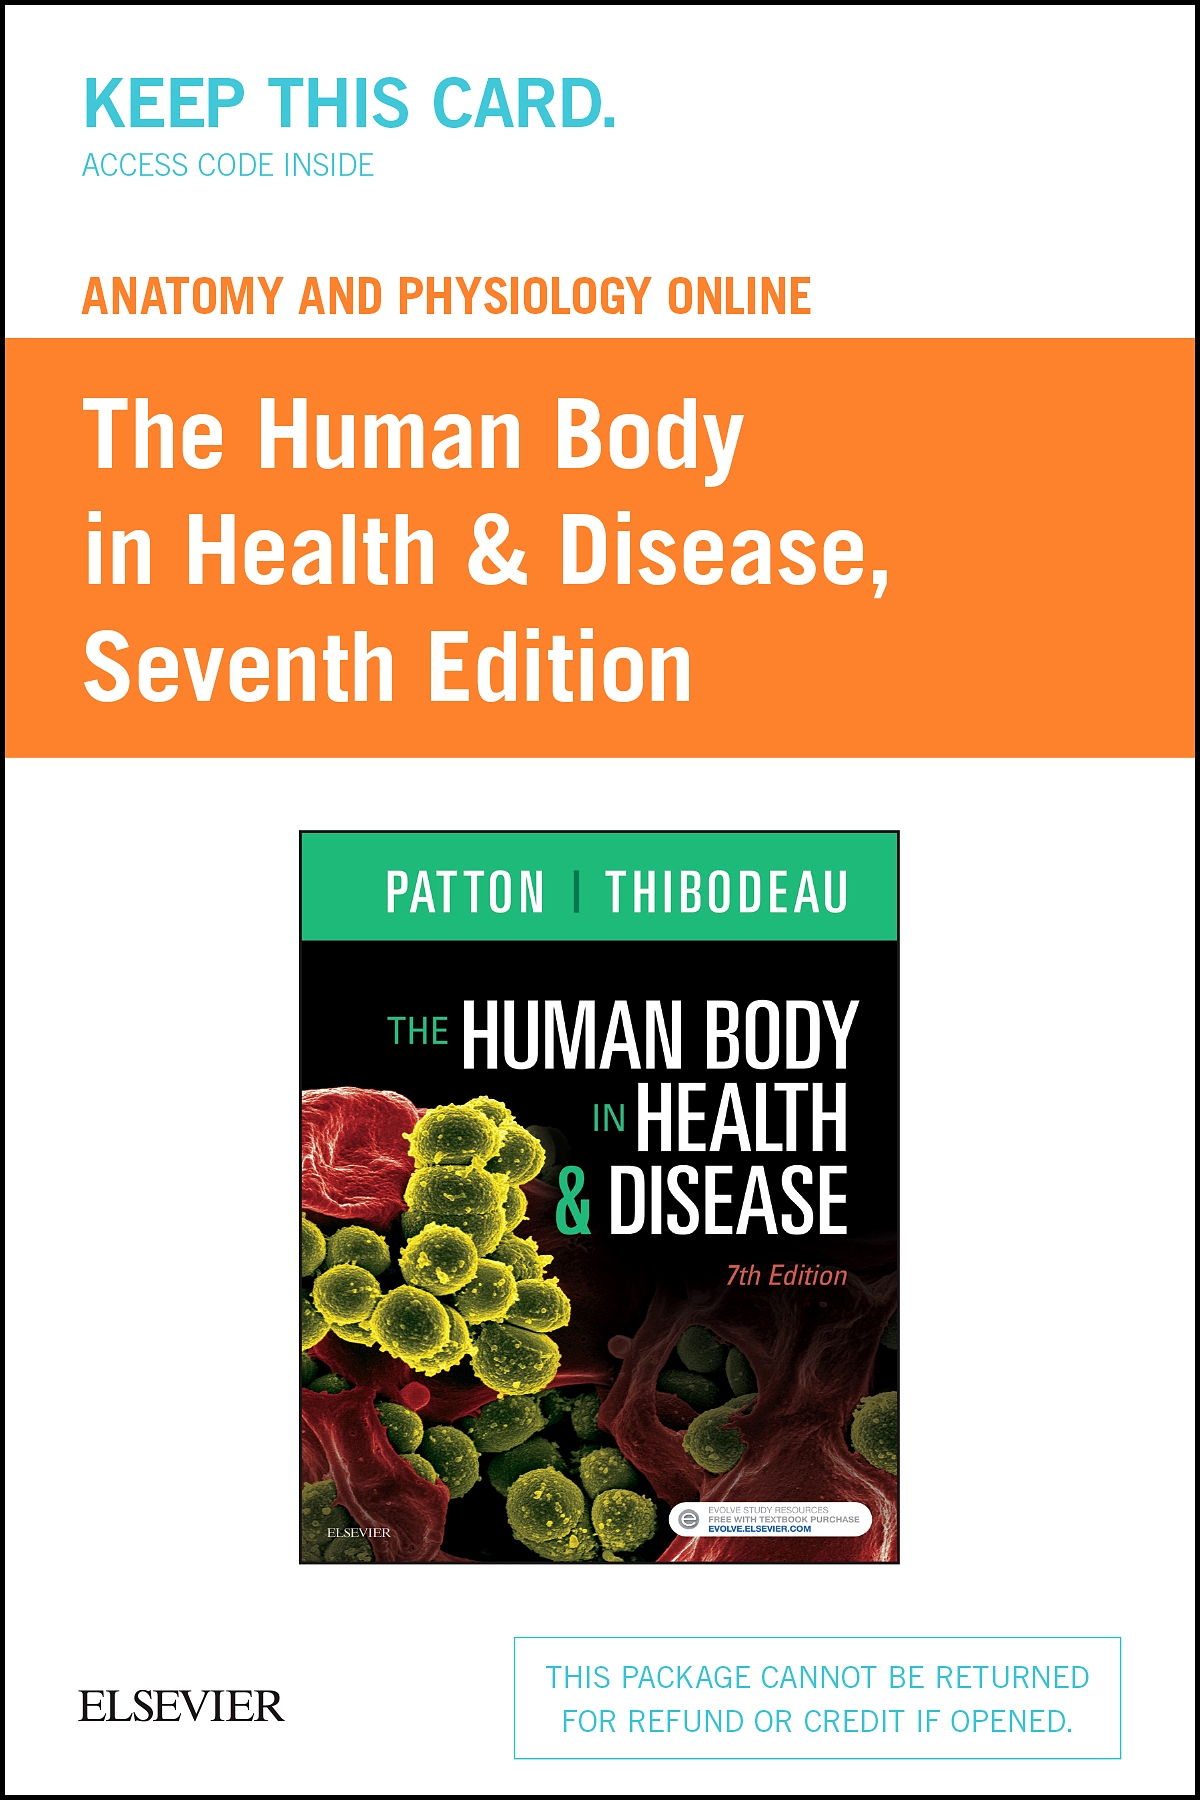 Anatomy and Physiology Online for The Human Body in Health & Disease (Access Code), 7th Edition